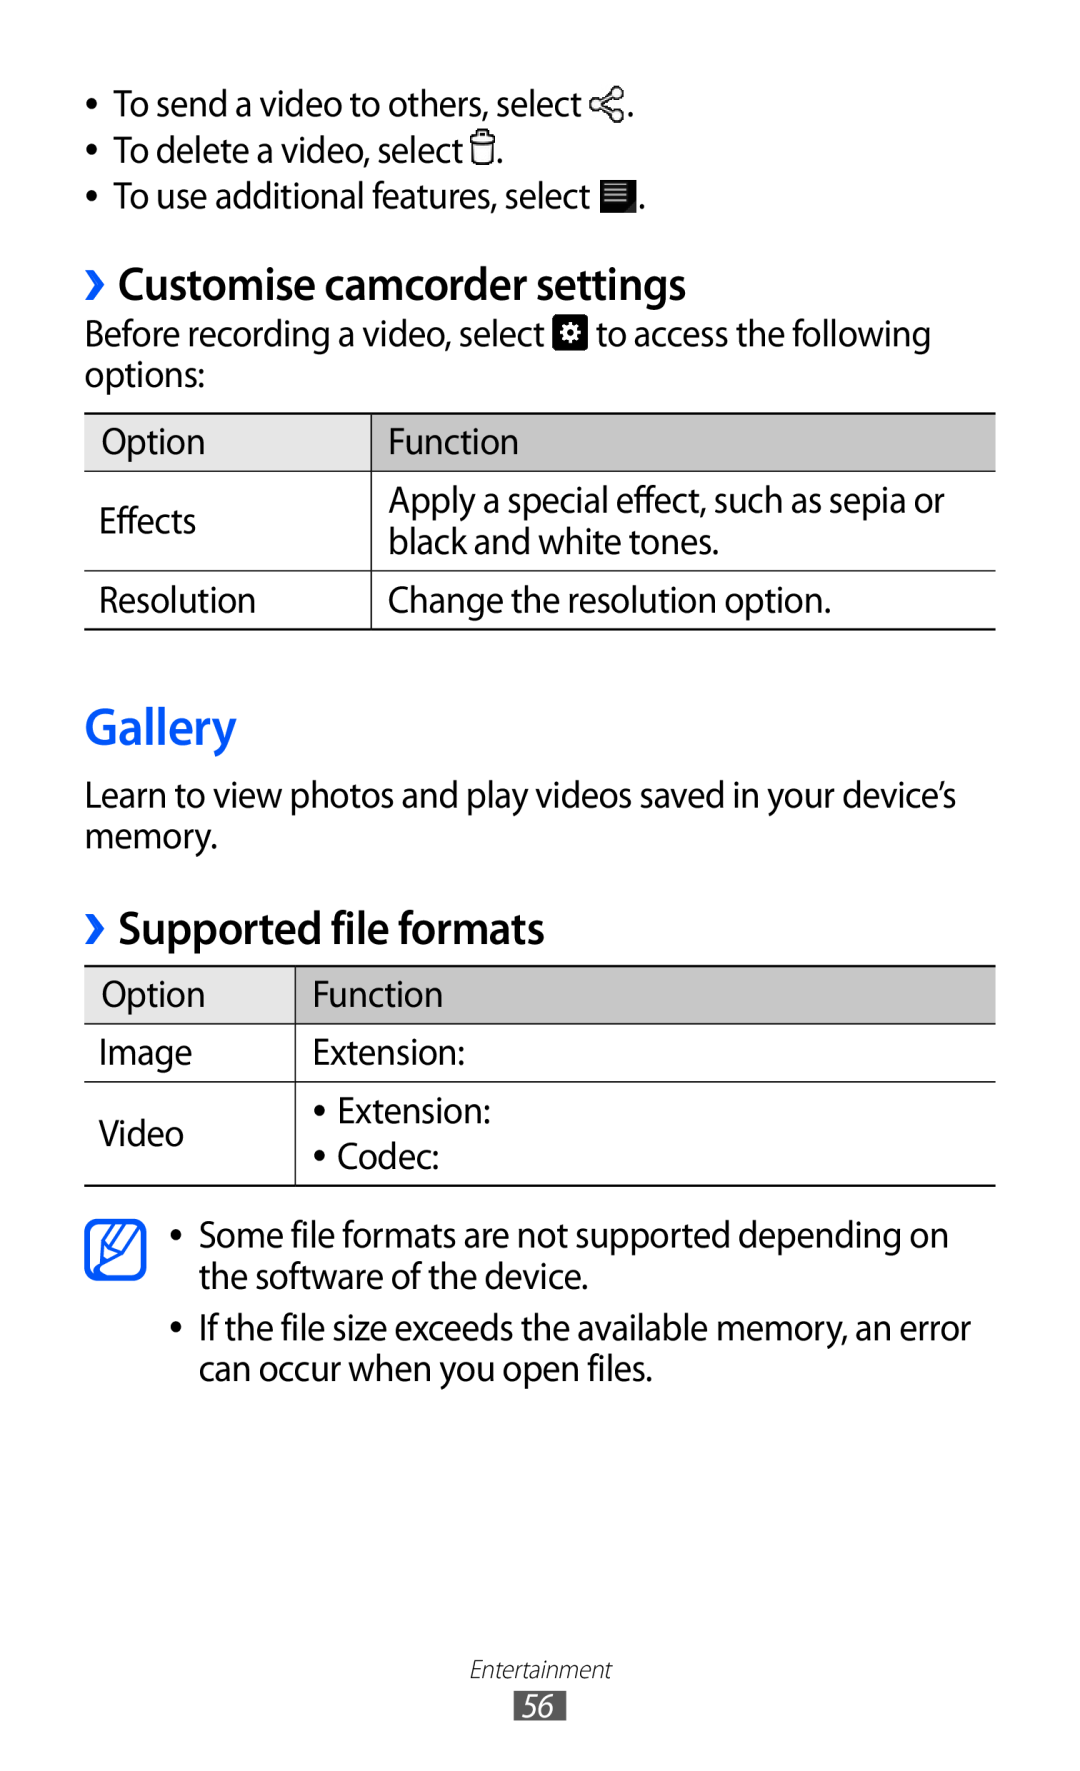 Samsung GT-P7510 user manual Gallery, ››Customise camcorder settings, ››Supported file formats 